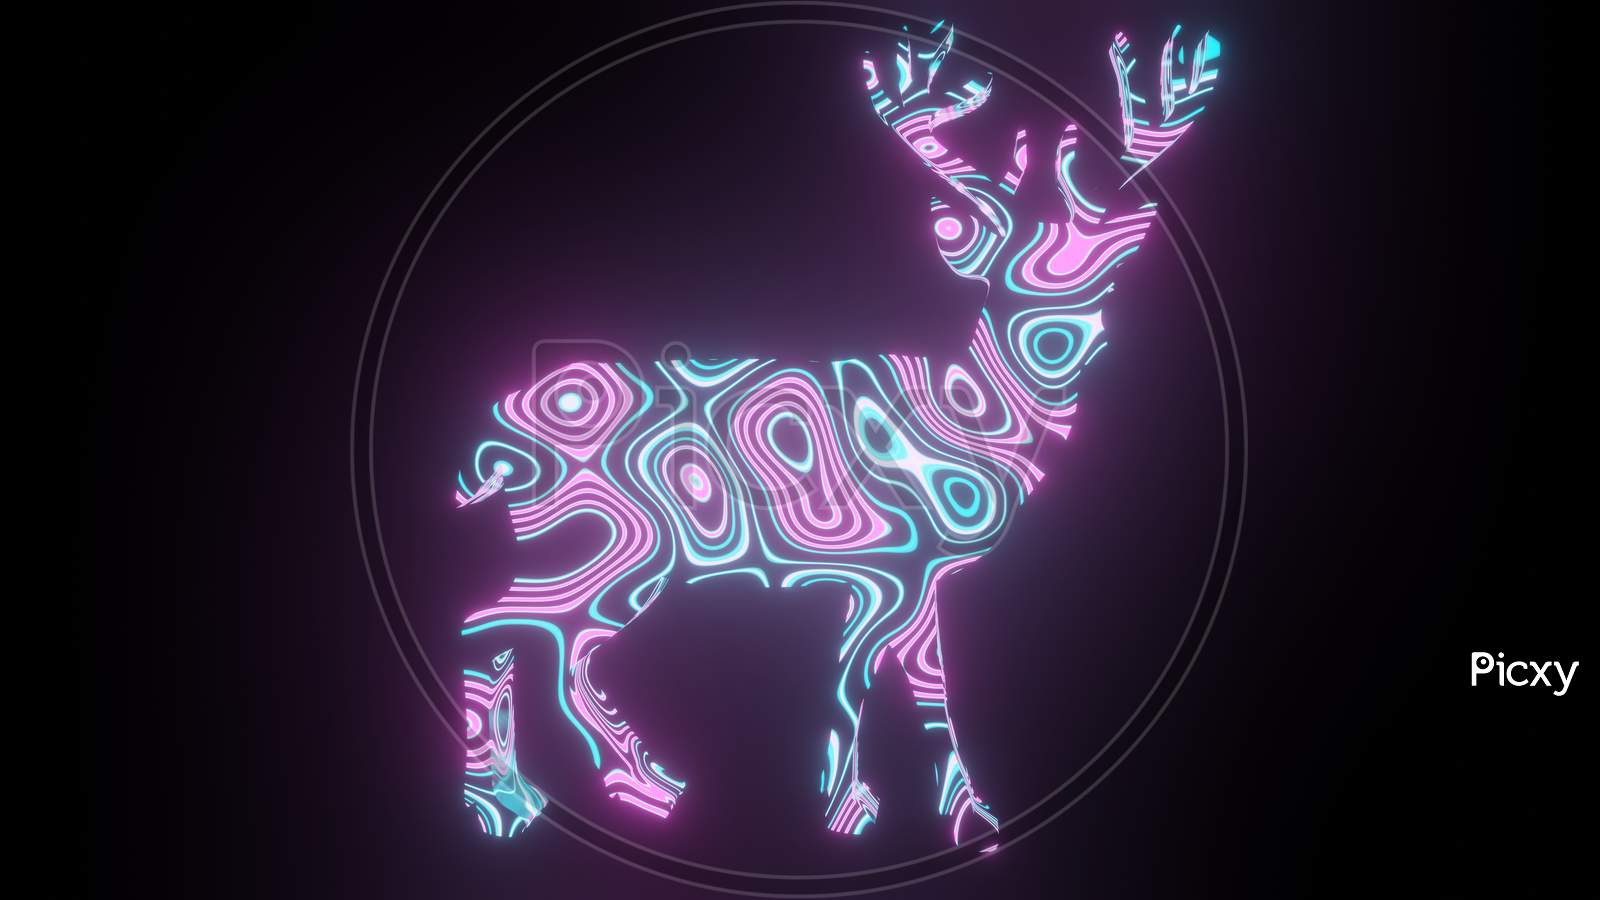 Illustration Graphic Of Beautiful Texture Or Pattern Formation On The Deer Body Shape, Isolated On Black Background. 3D Rendering Abstract Loop Neon Lighting Effect On Reindeer.